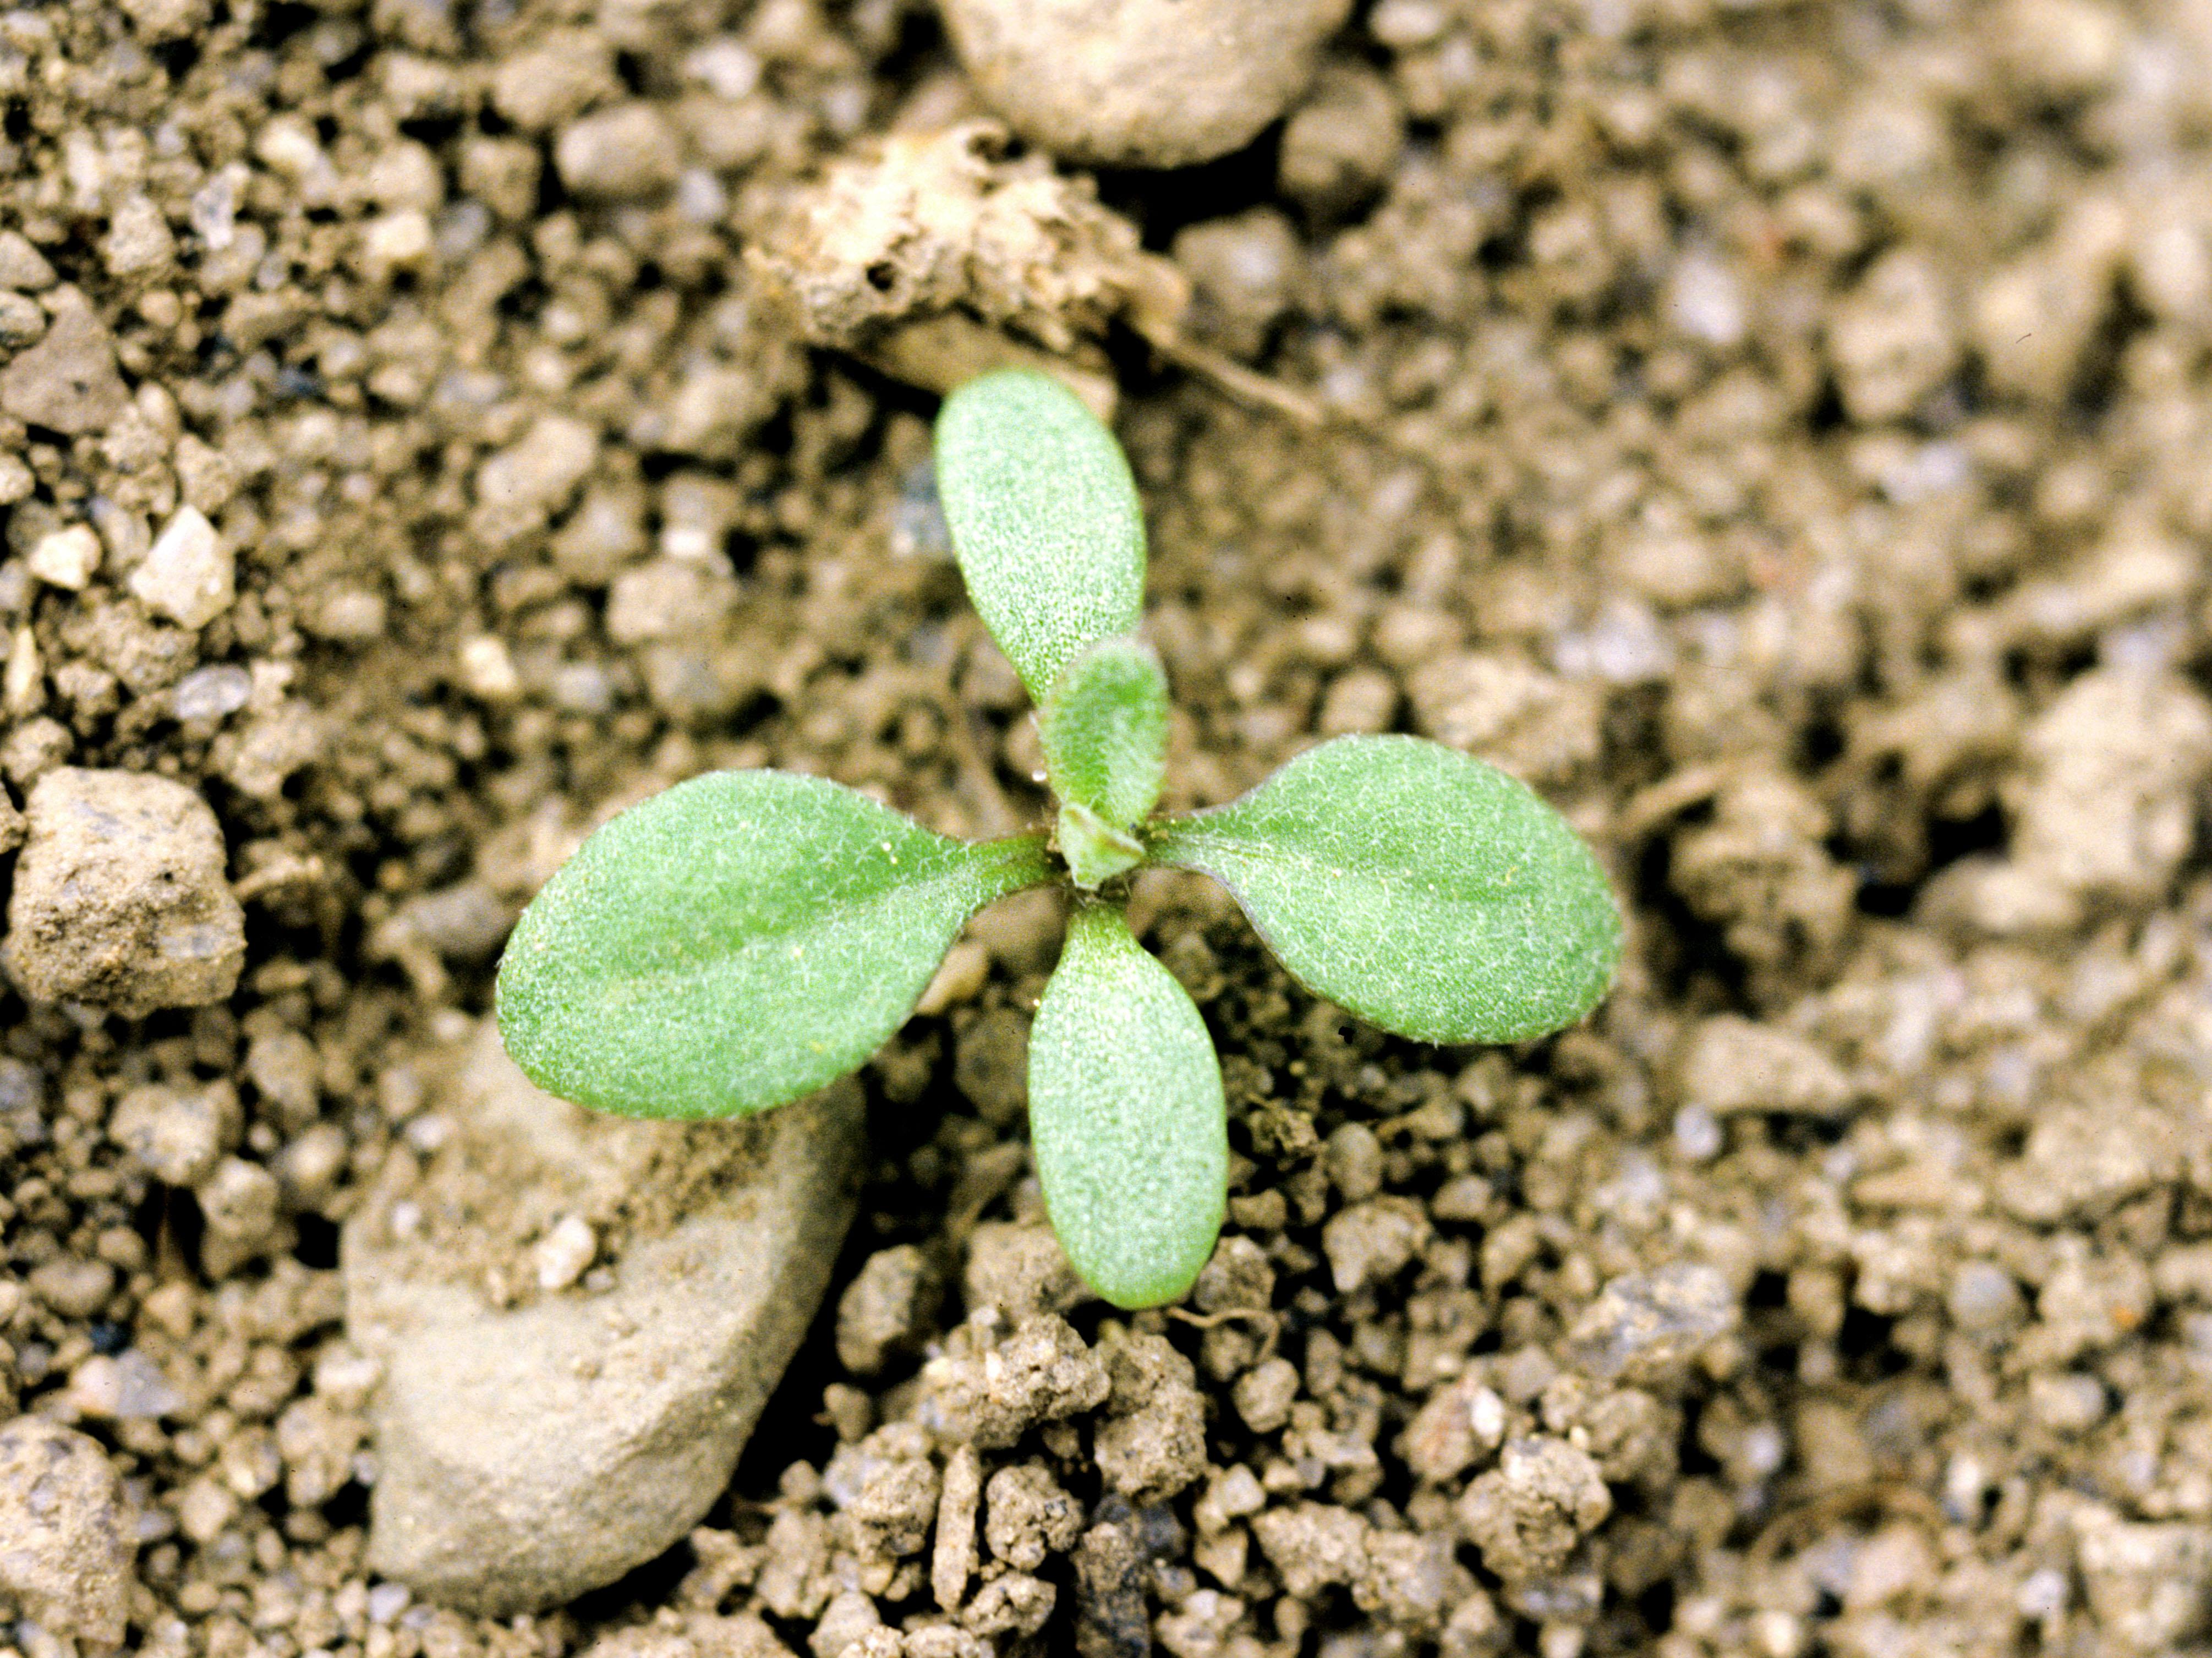 How cotyledon is different from true leaf? - Quora